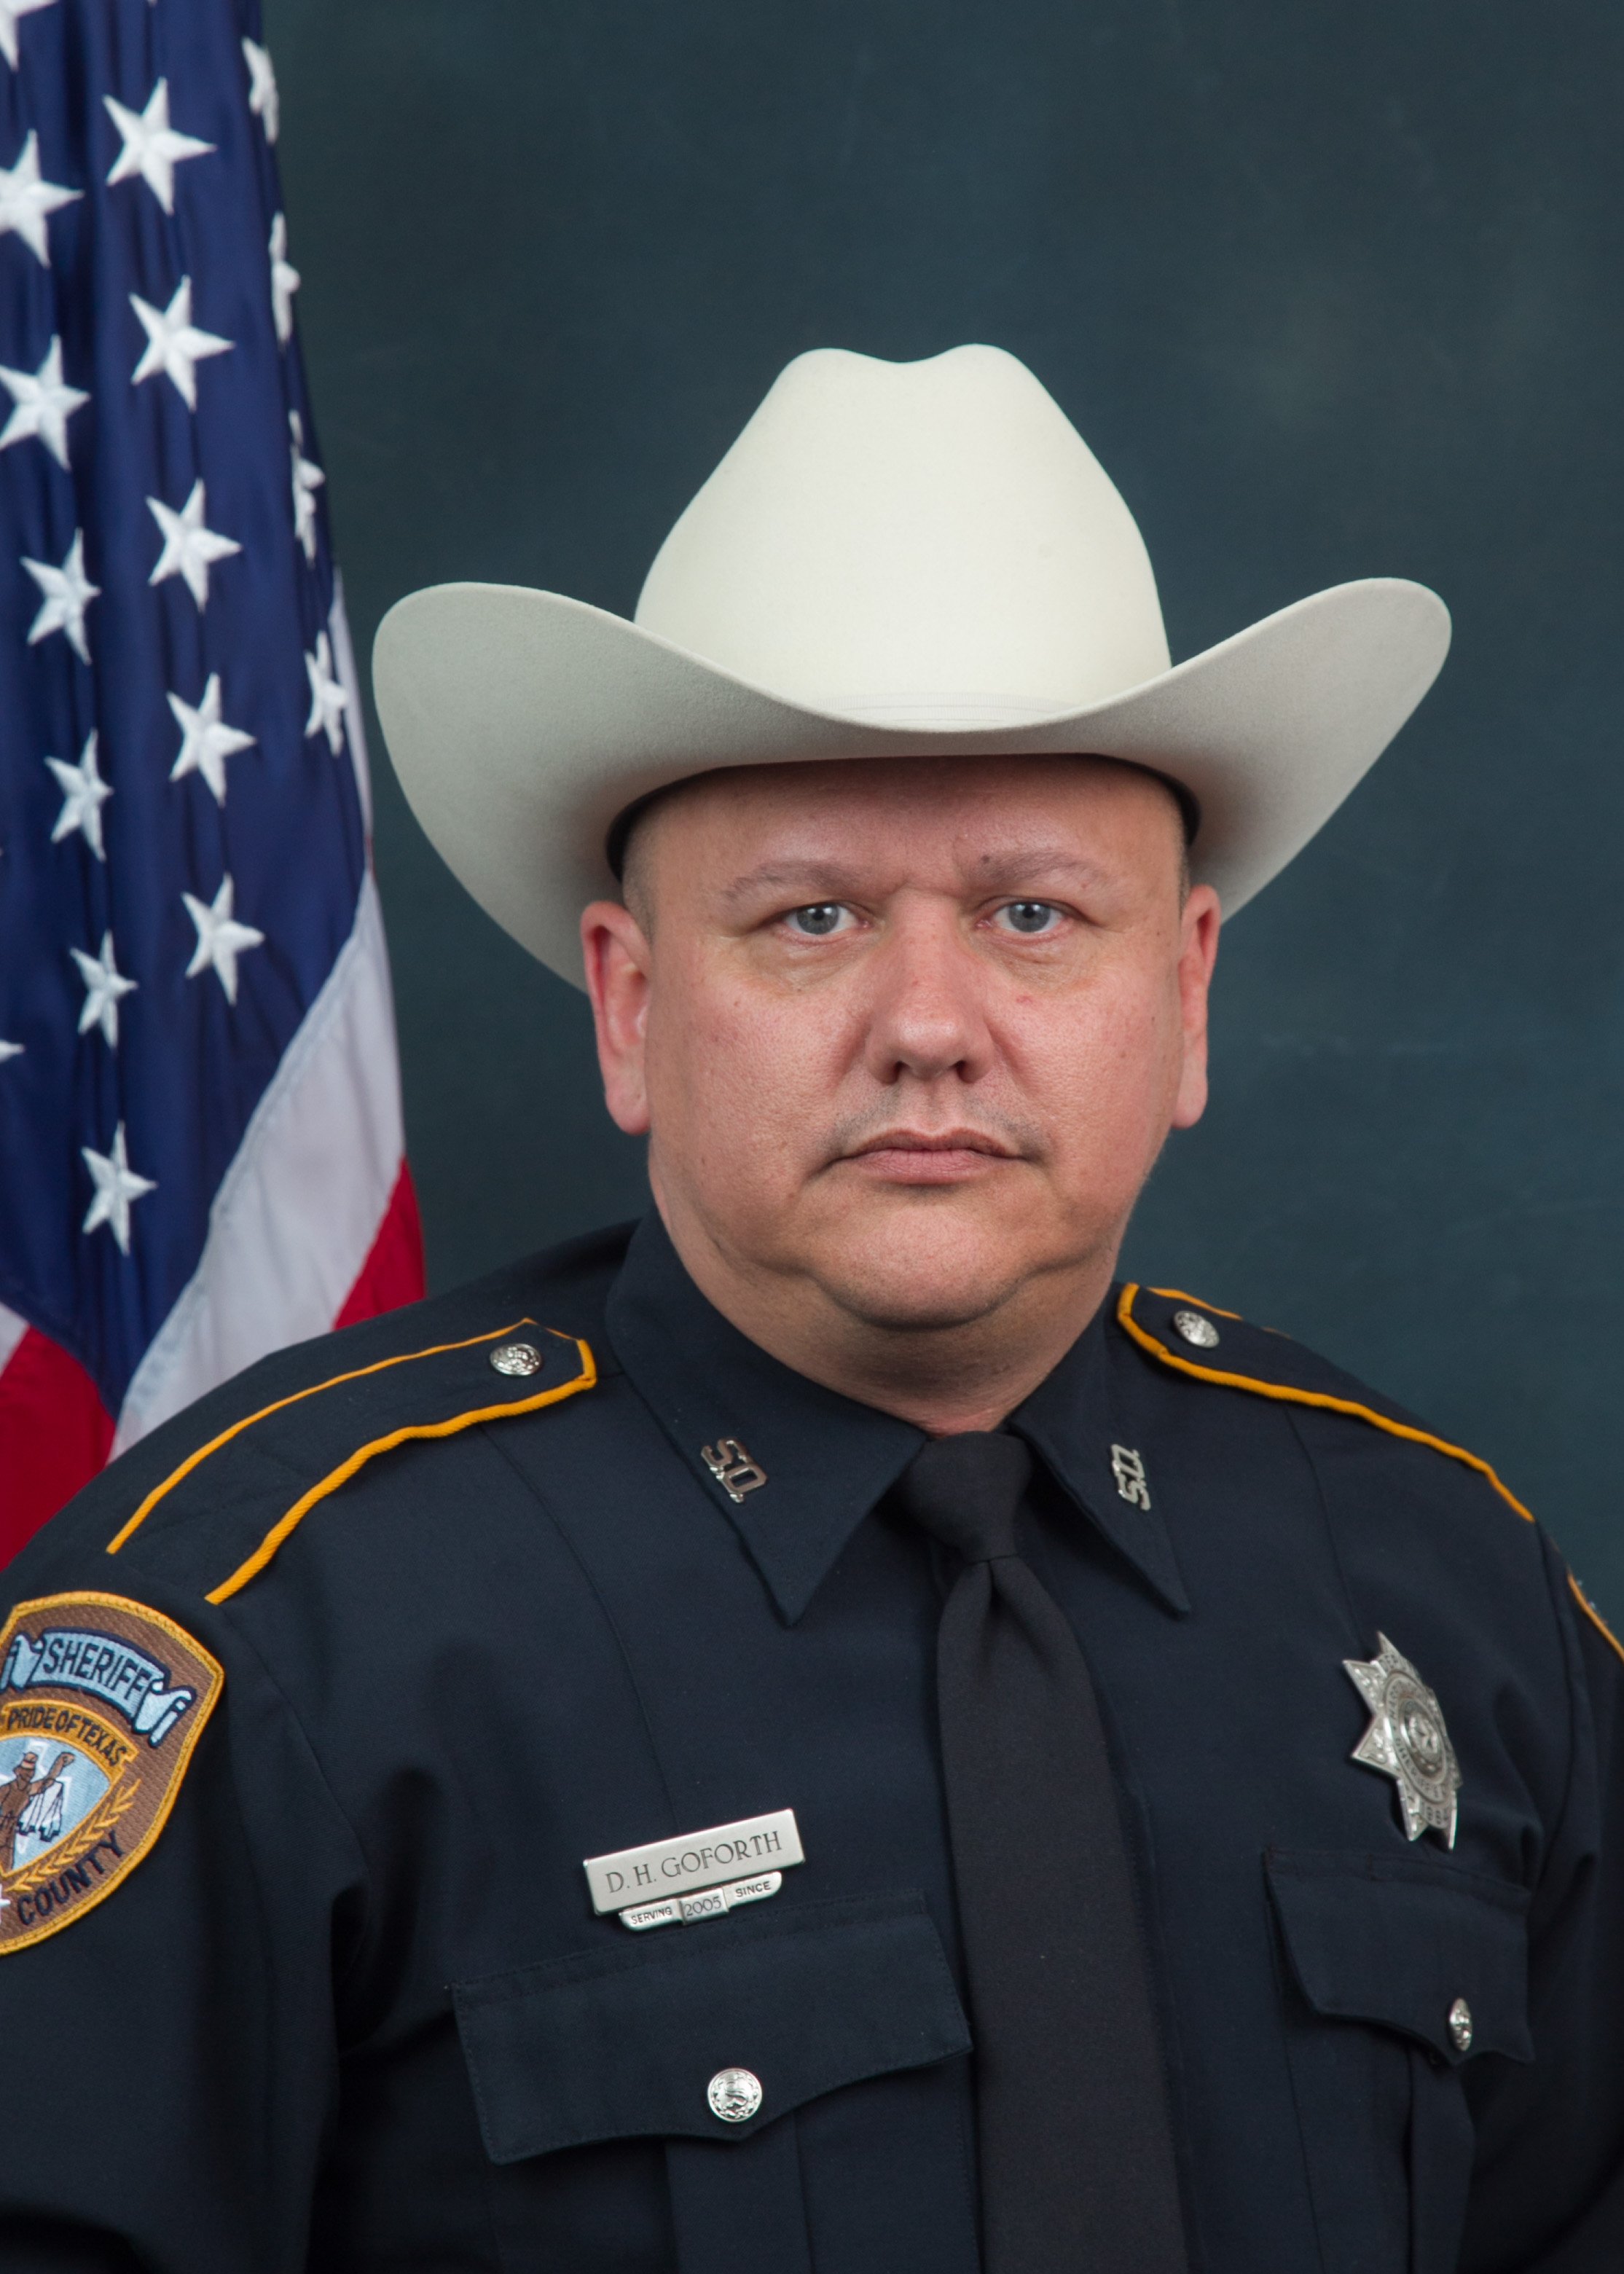 Harris County, Texas, Deputy Darren H. Goforth was shot and killed for no apparent reason at a service station August 28, 2015, by Shannon J. Miles.